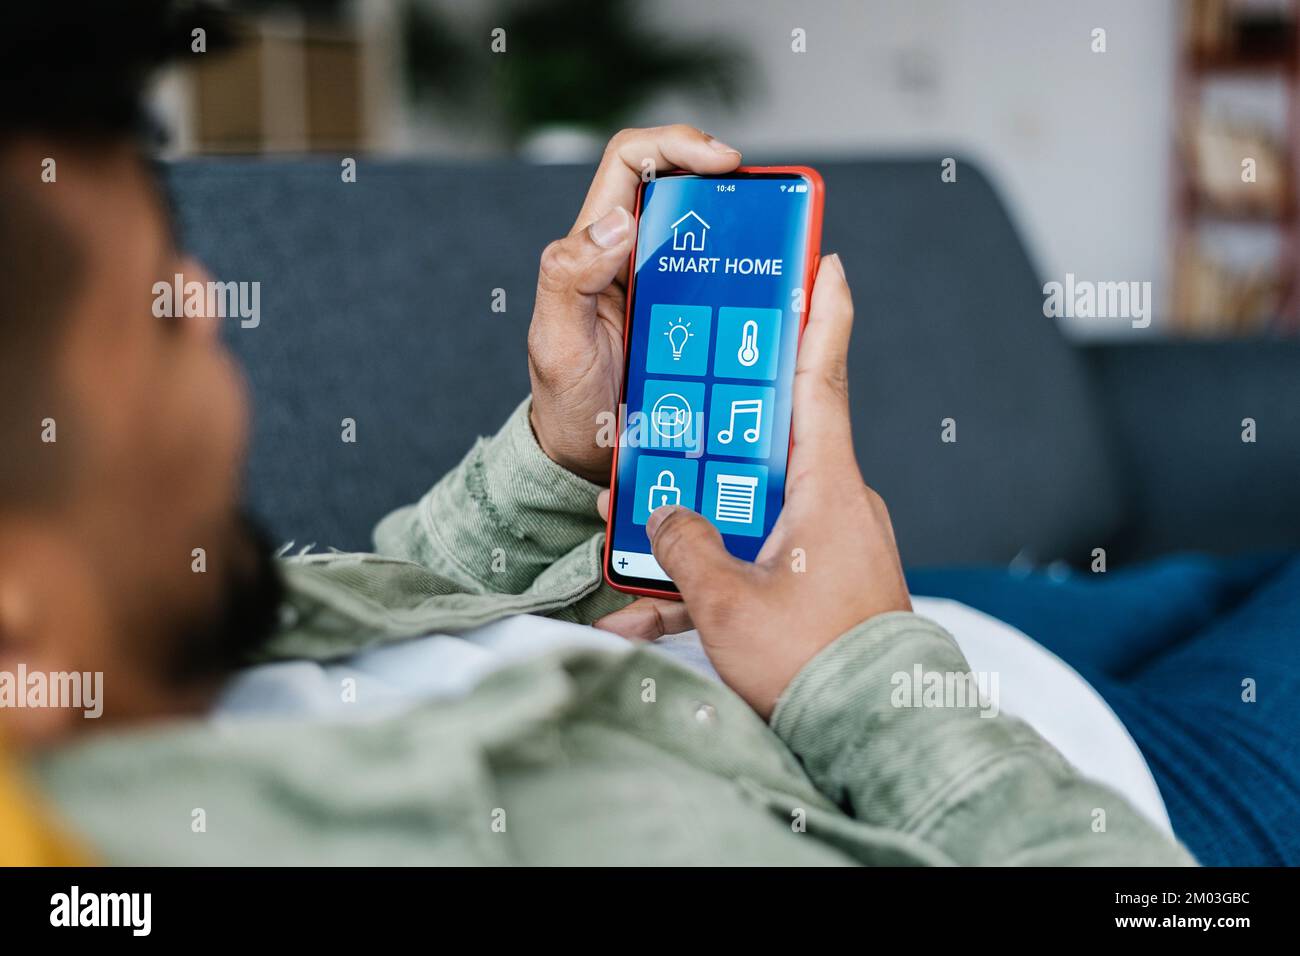 Internet of things. Young latin man using smart home app on mobile phone Stock Photo